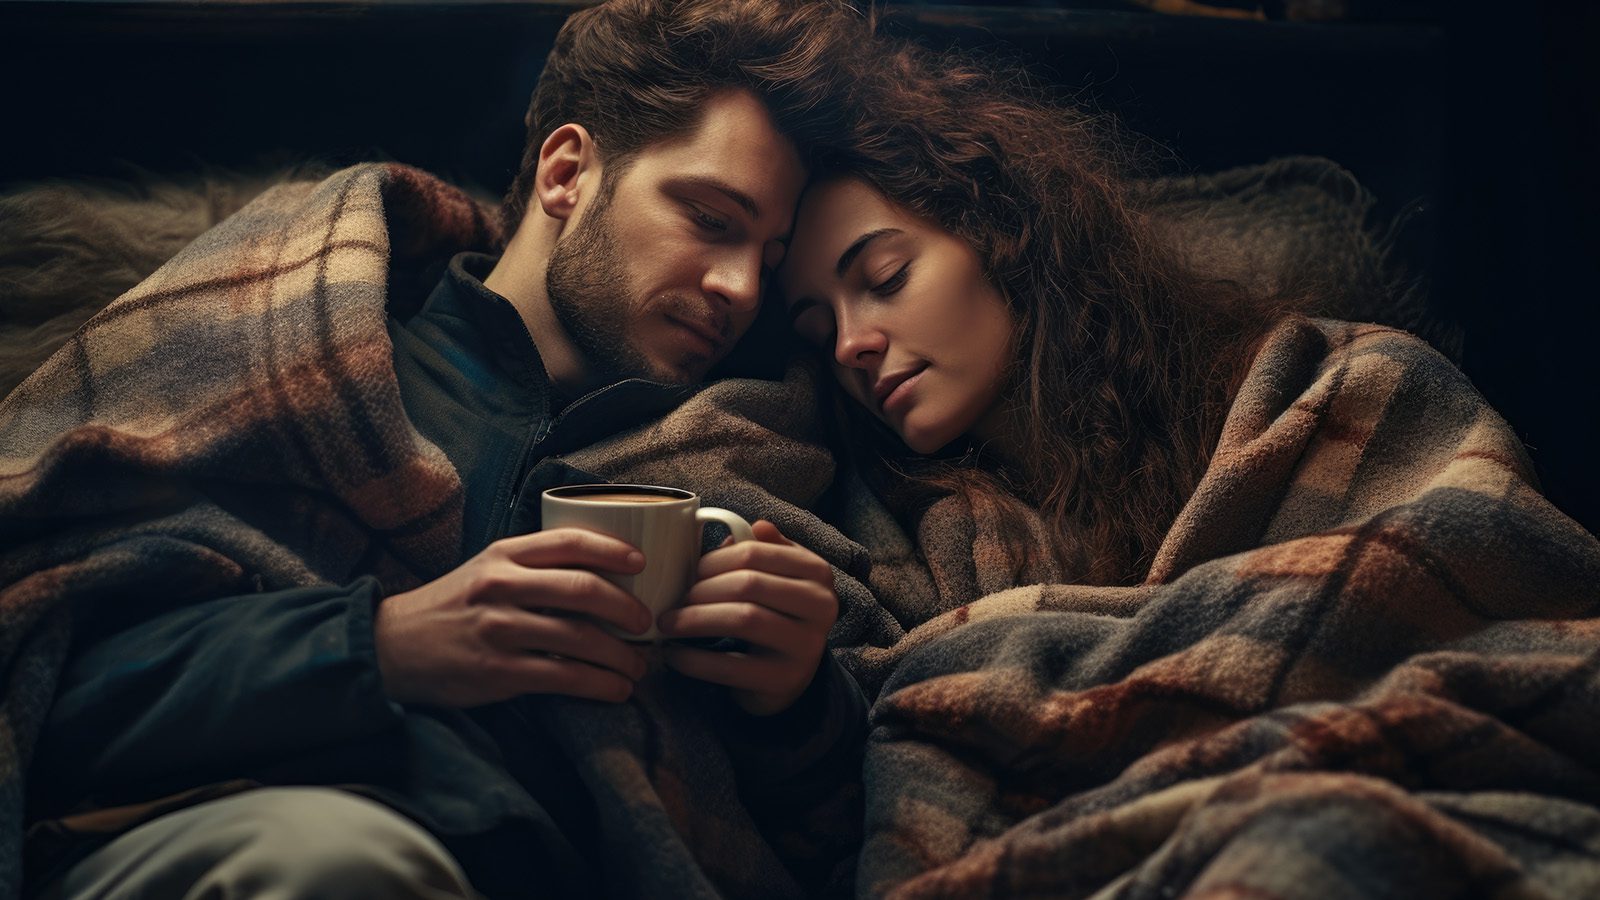 40 Signs You’ve Found Your True Love